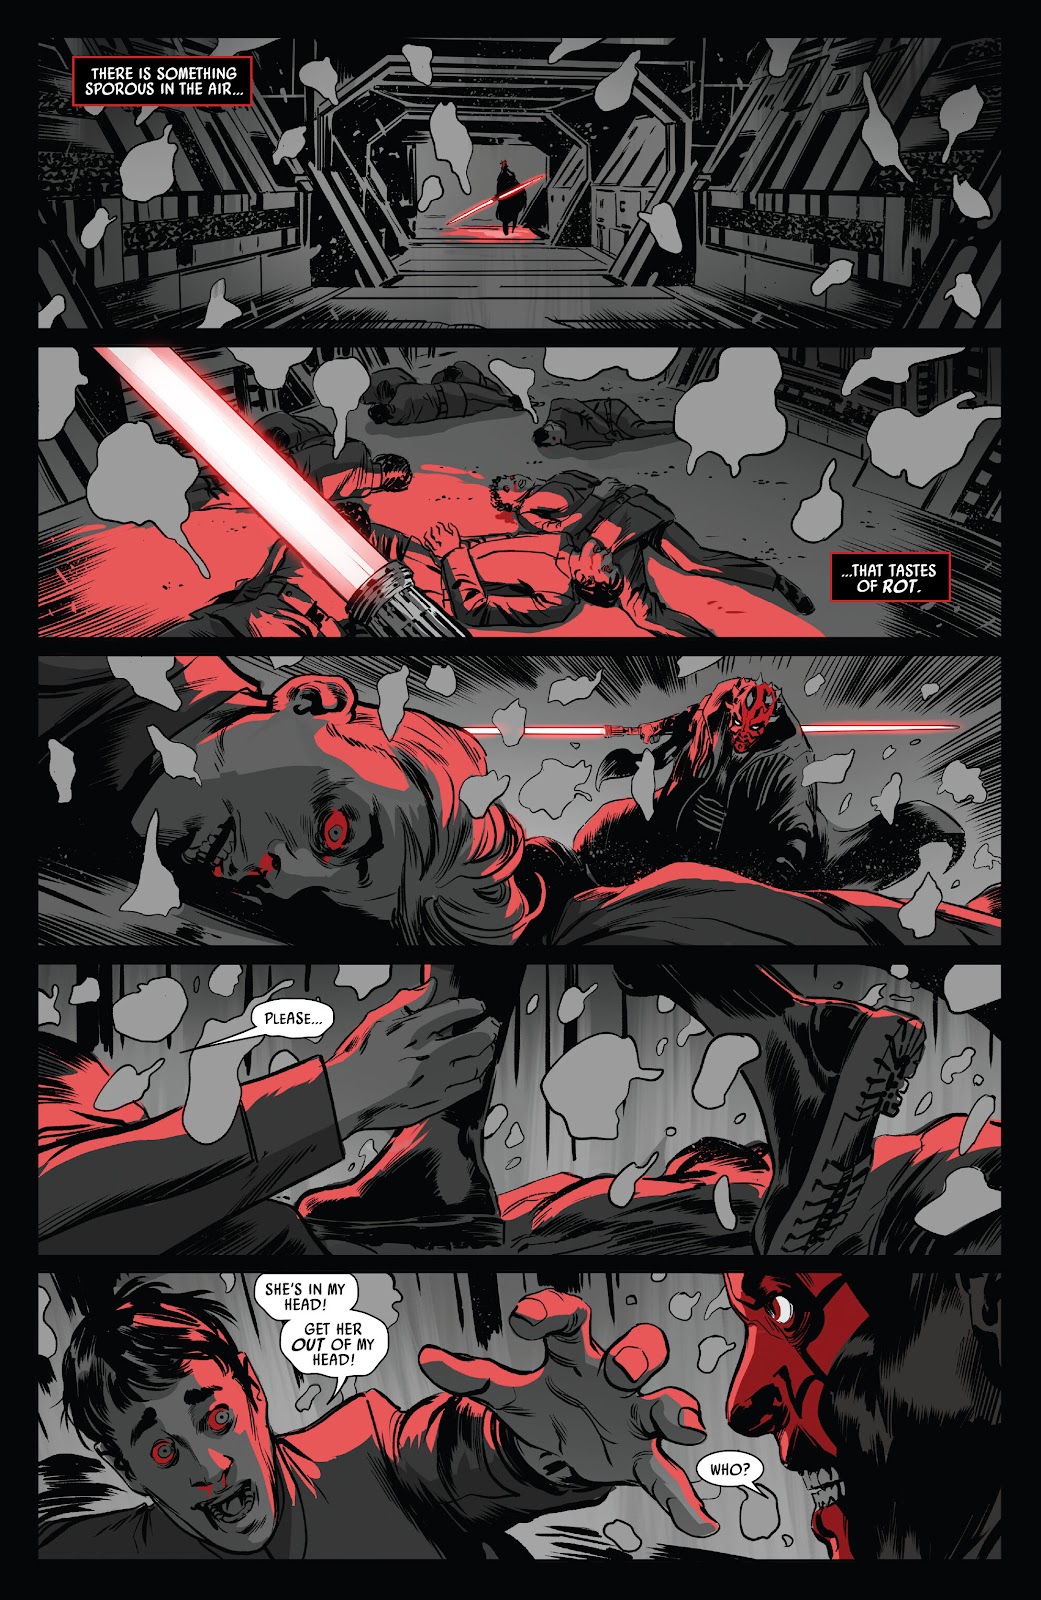 Star Wars: Darth Maul - Black, White & Red issue 1 - Page 12